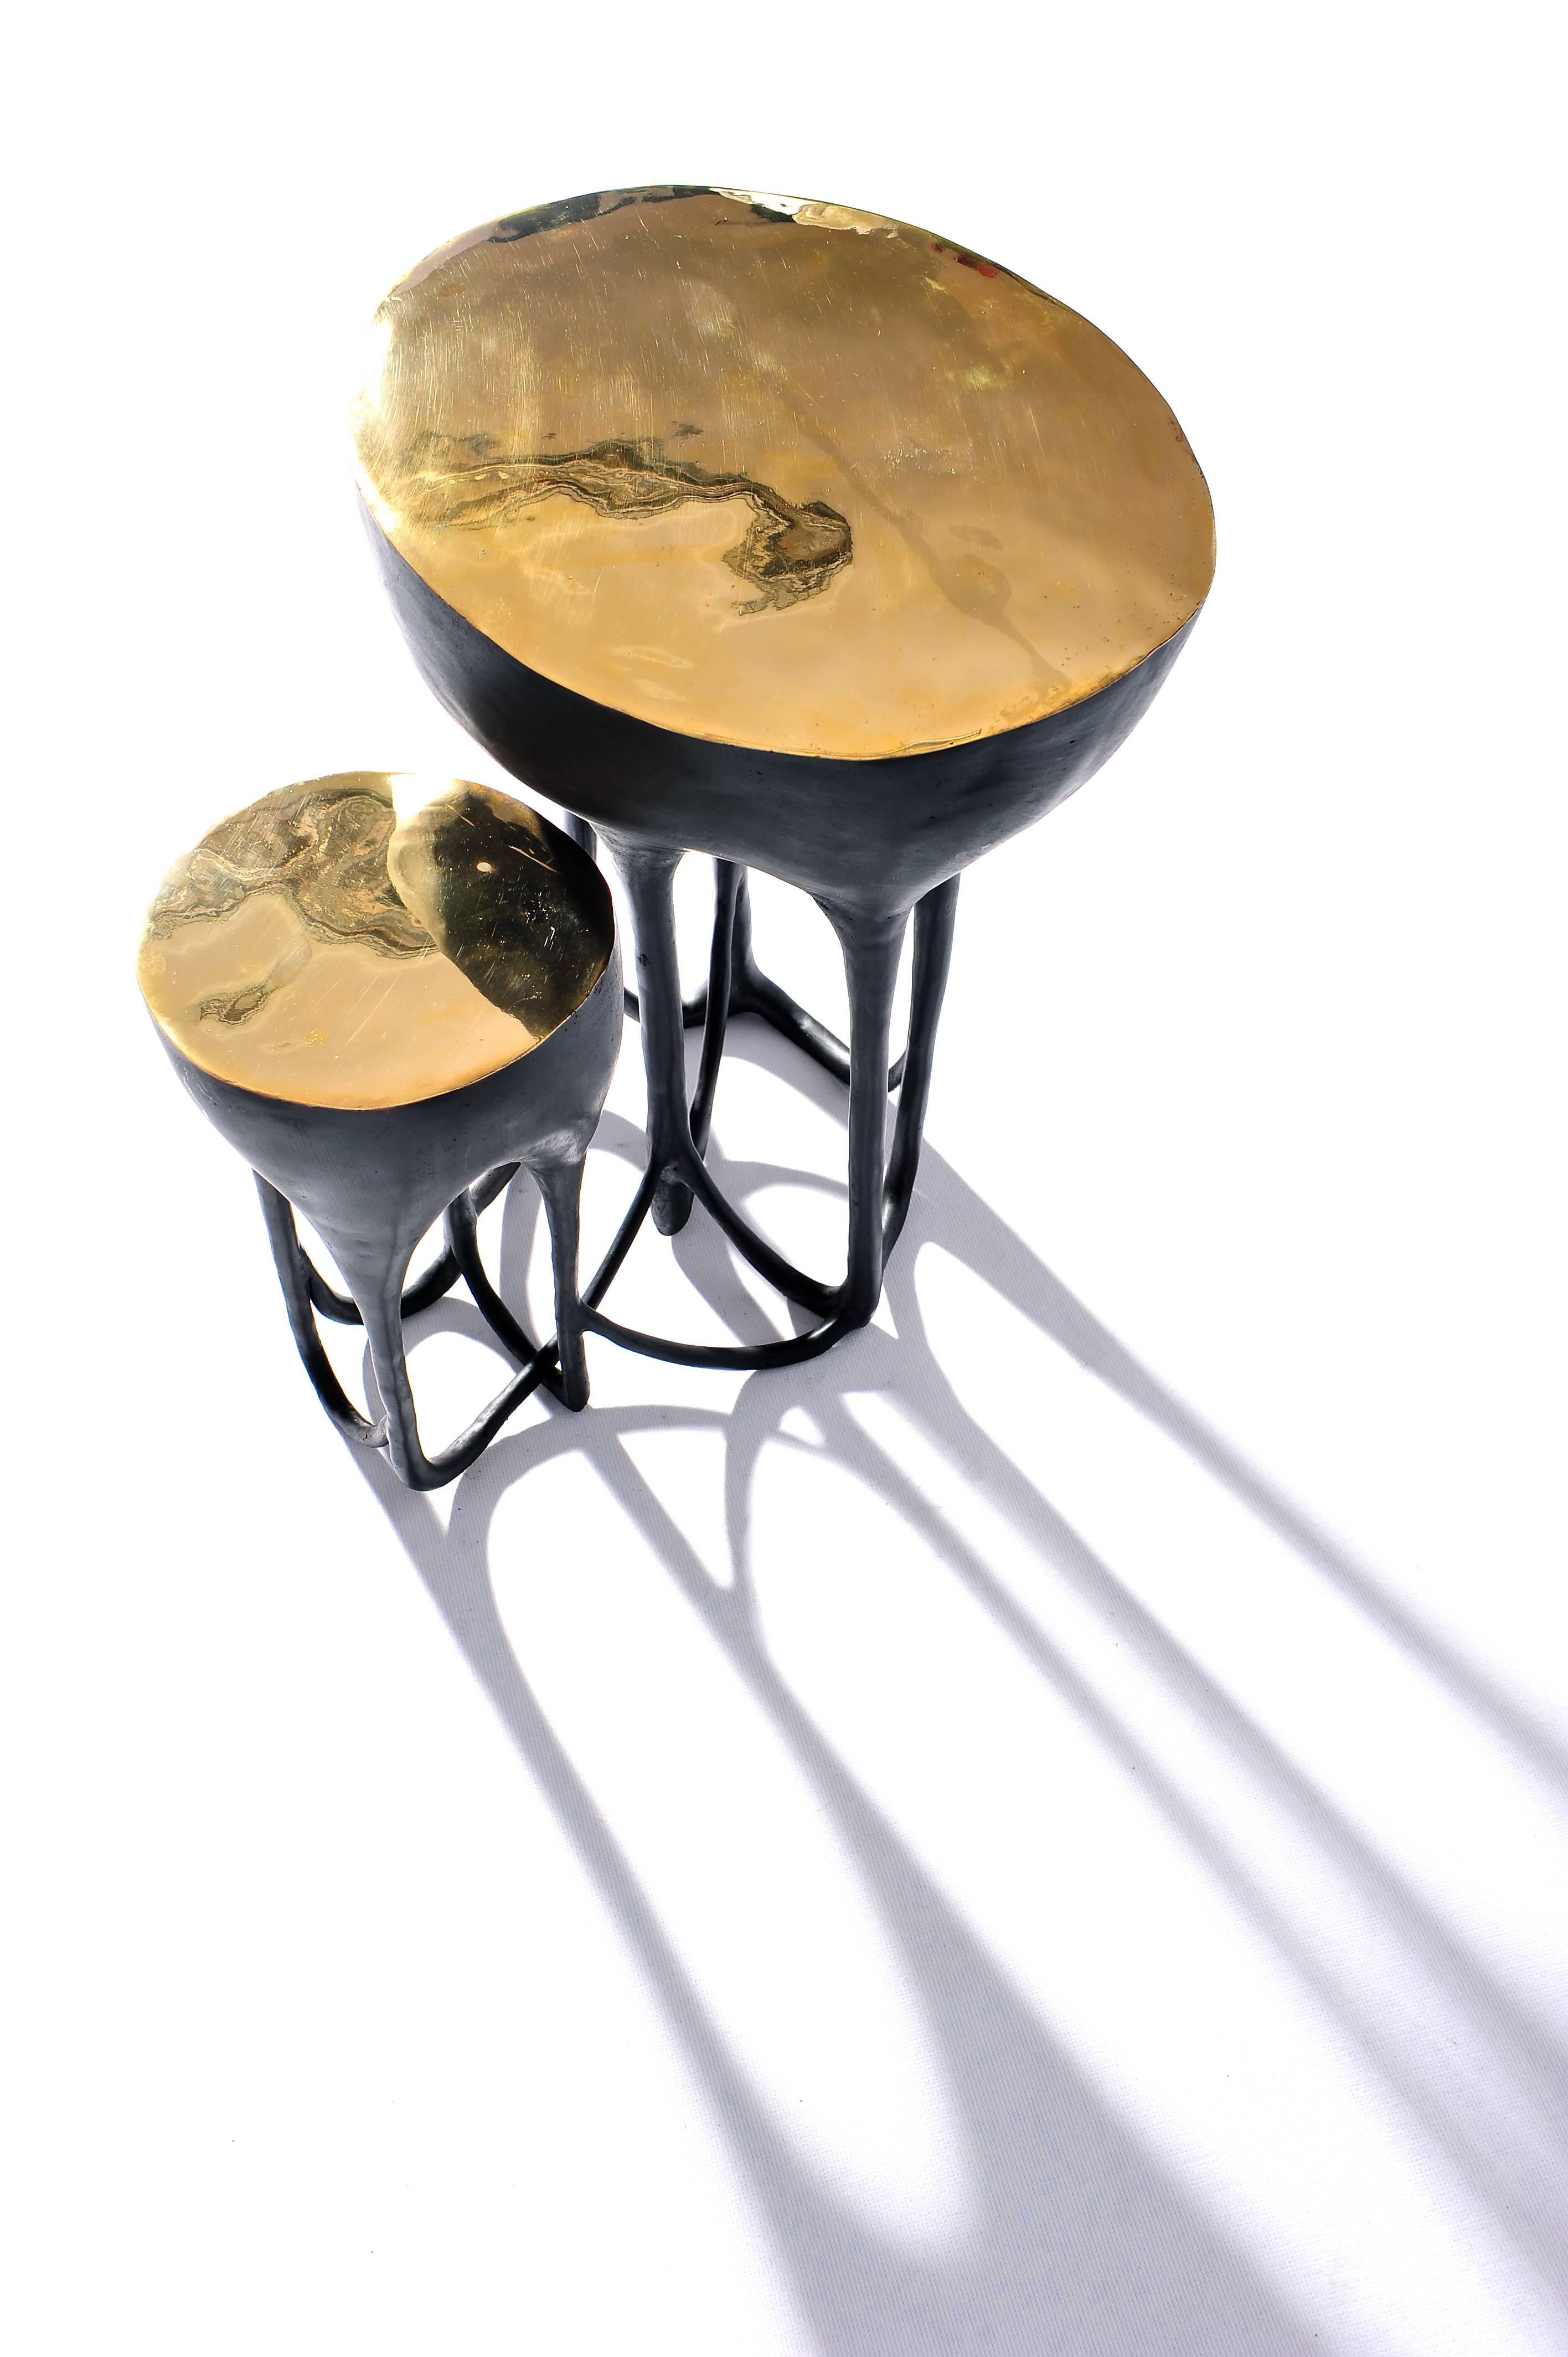 Brass hand-sculpted side table by Misaya.
Brass hand-sculpted side table.
Dimensions: H 50 x W 43 x L 50 cm.